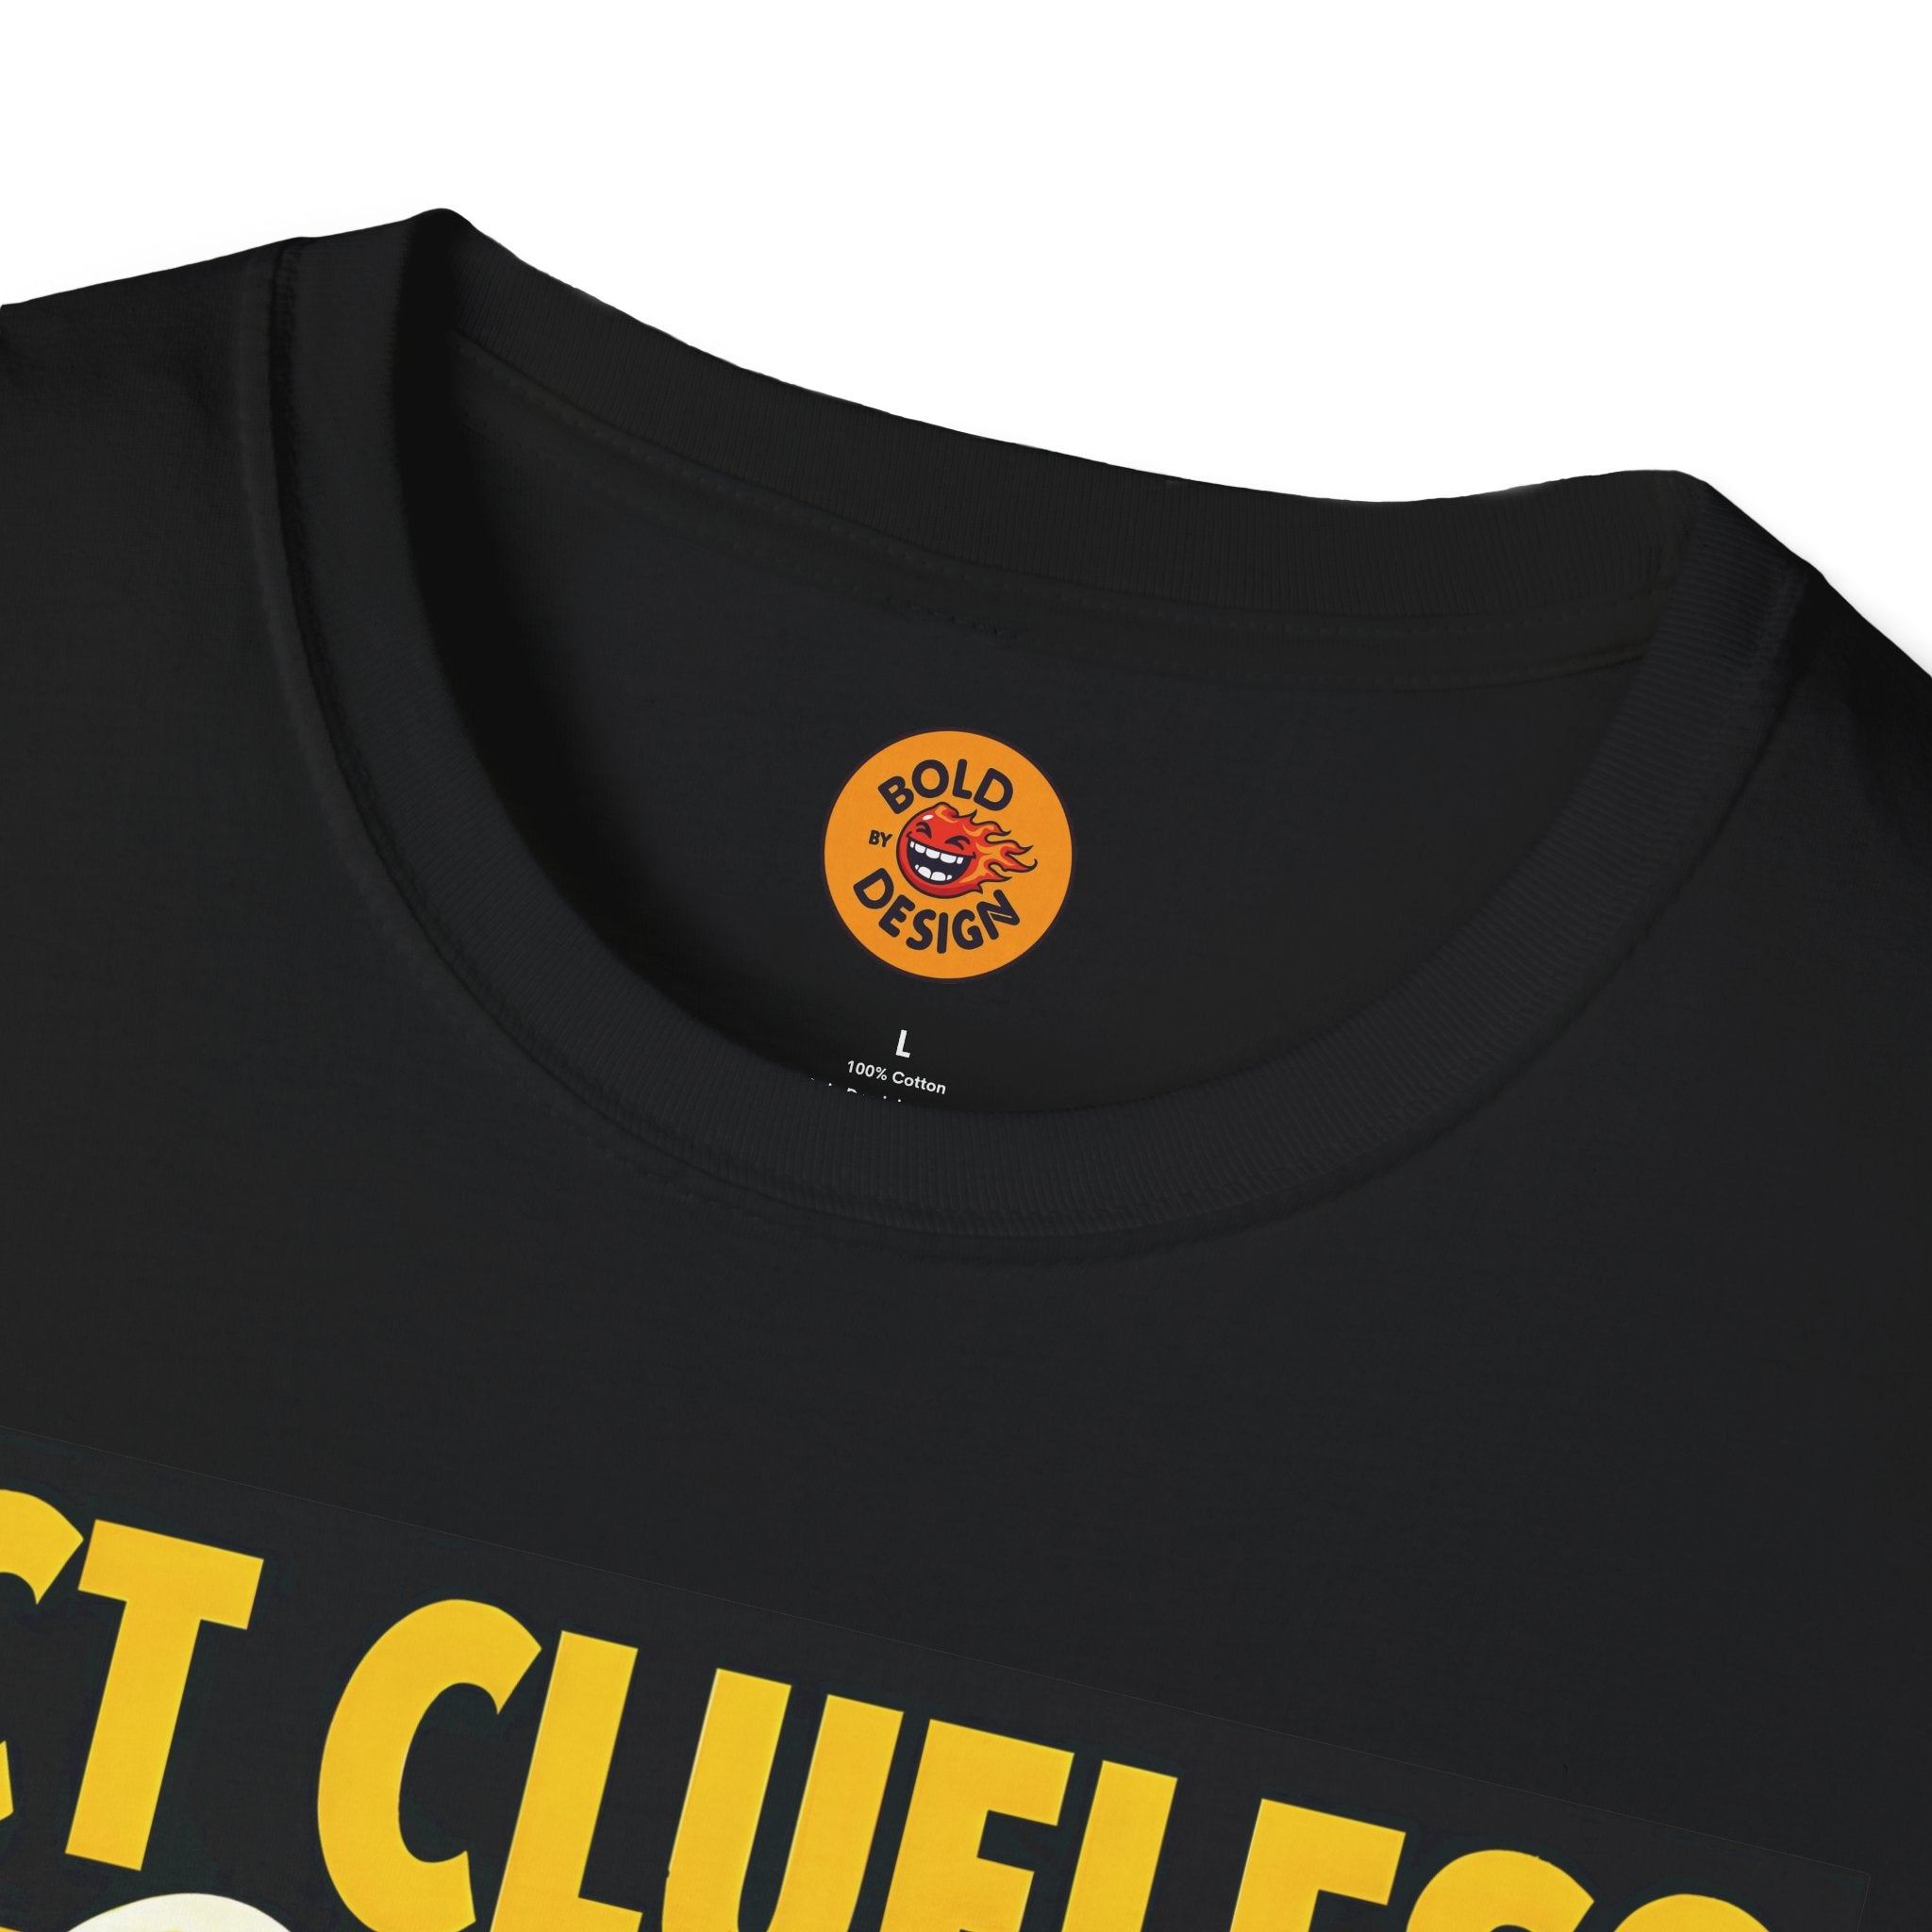 act clueless win more dog lover tee black